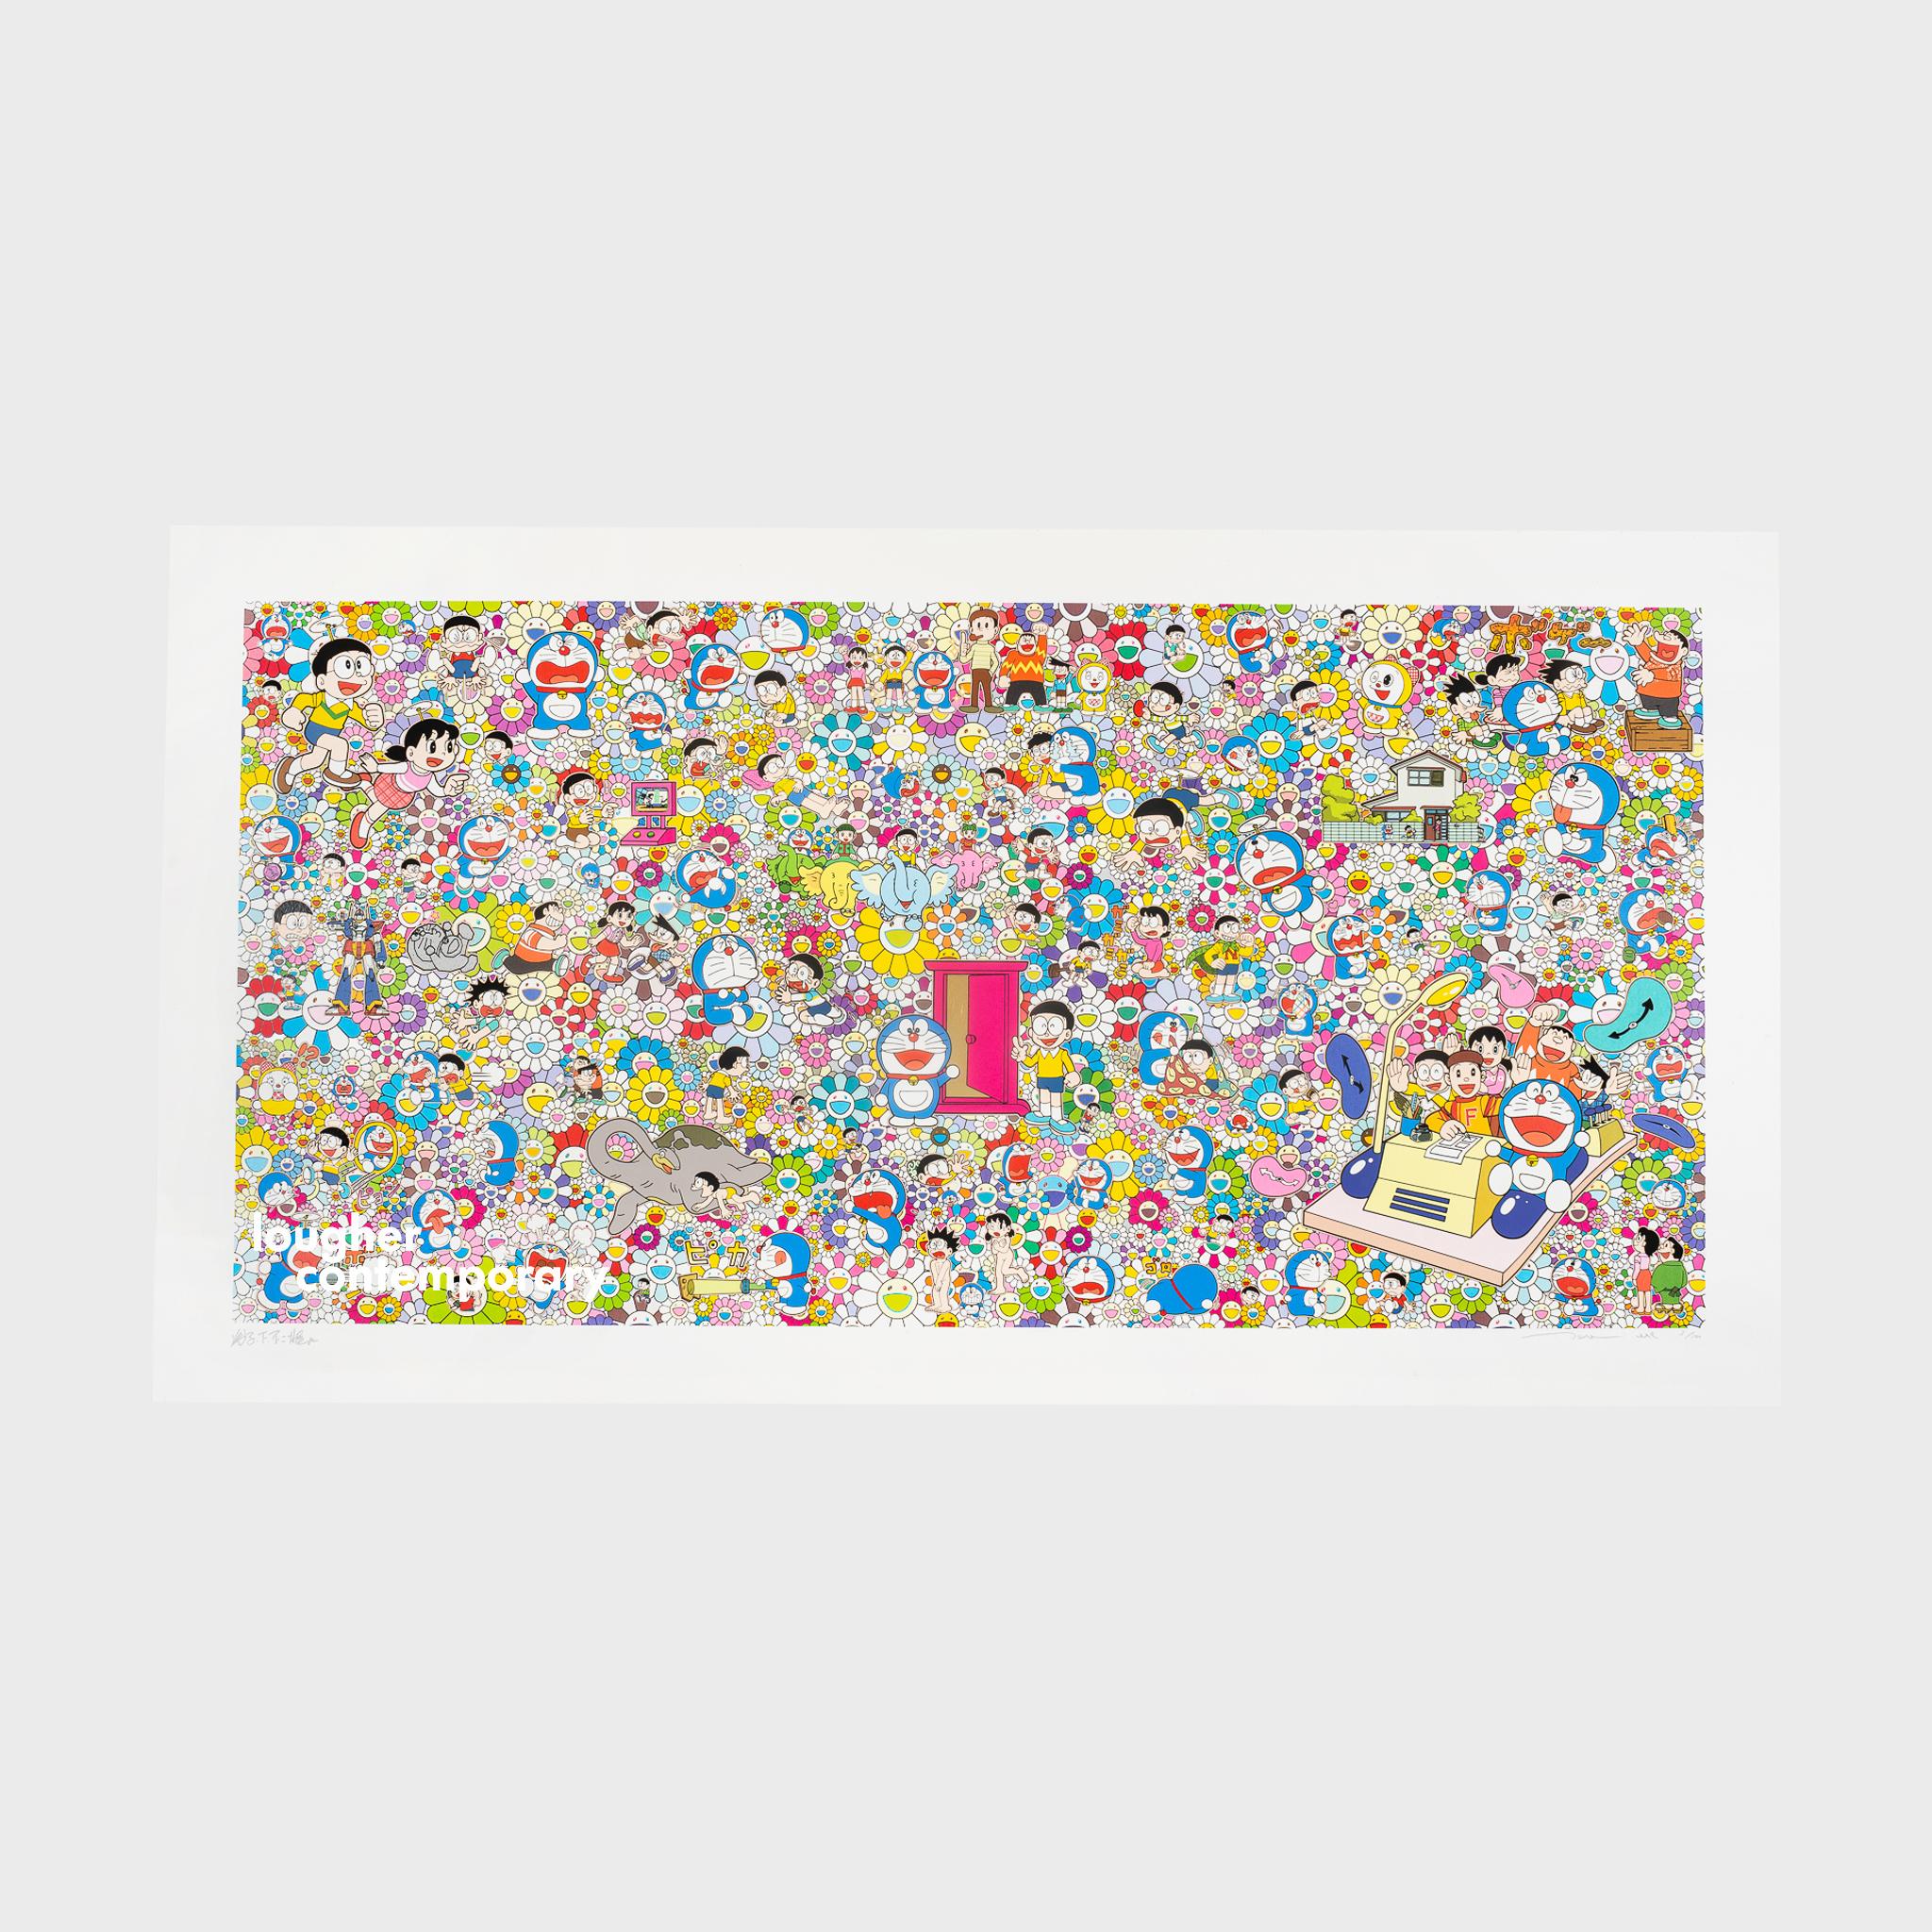 Wouldn't It Be Nice If We Could Do Such A Thing - Print by Takashi Murakami